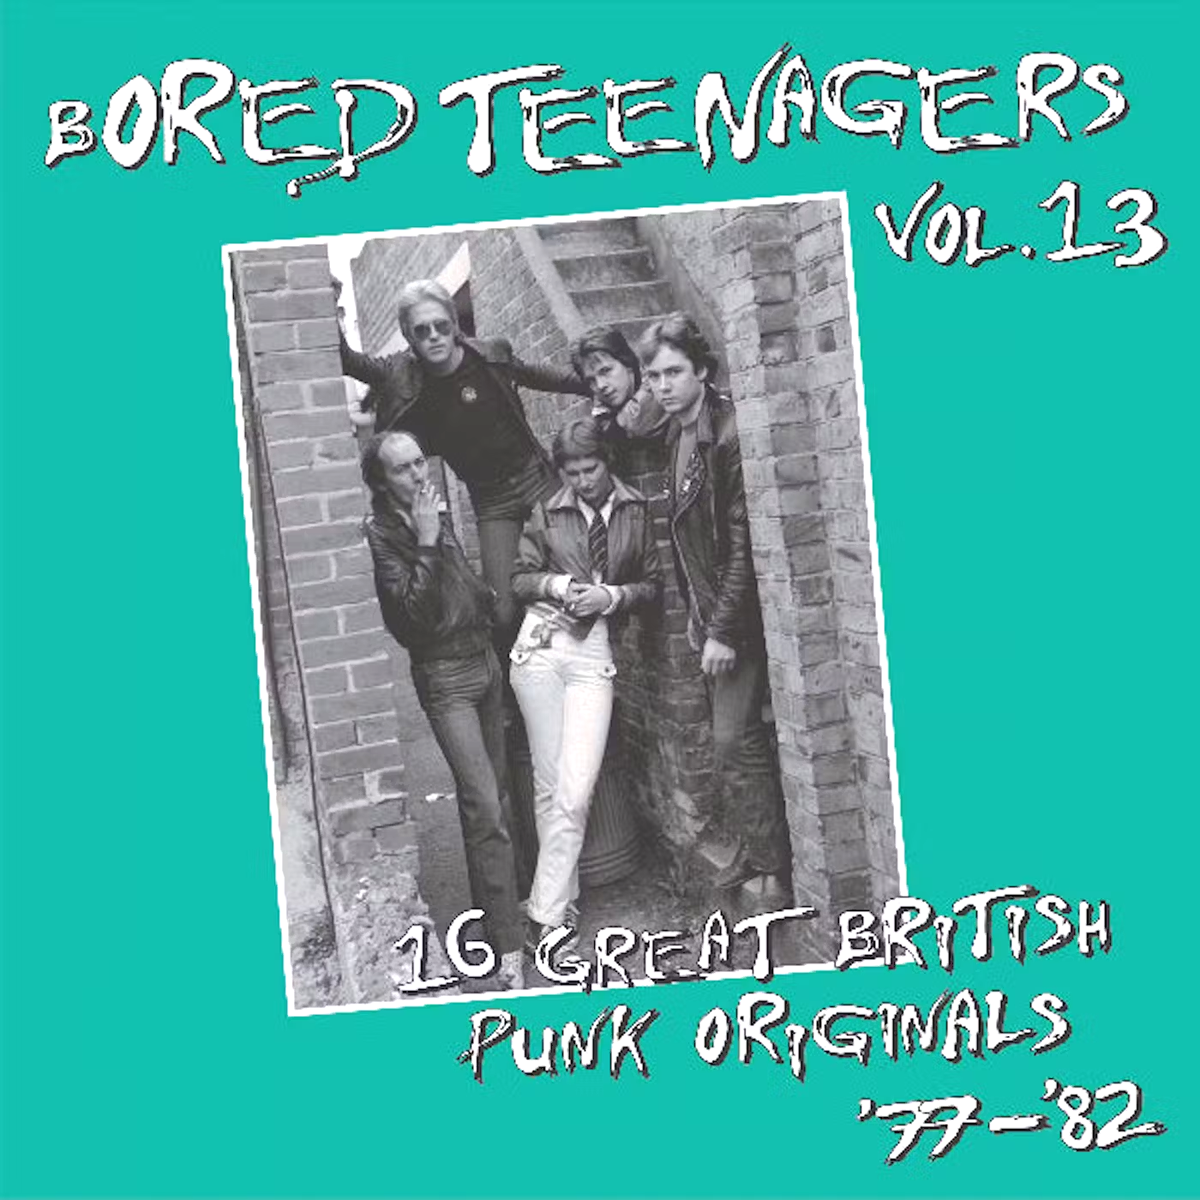 V/A- Bored Teenagers Vol. 13 LP ~REISSUE W/ 16 PAGE BOOKLET!